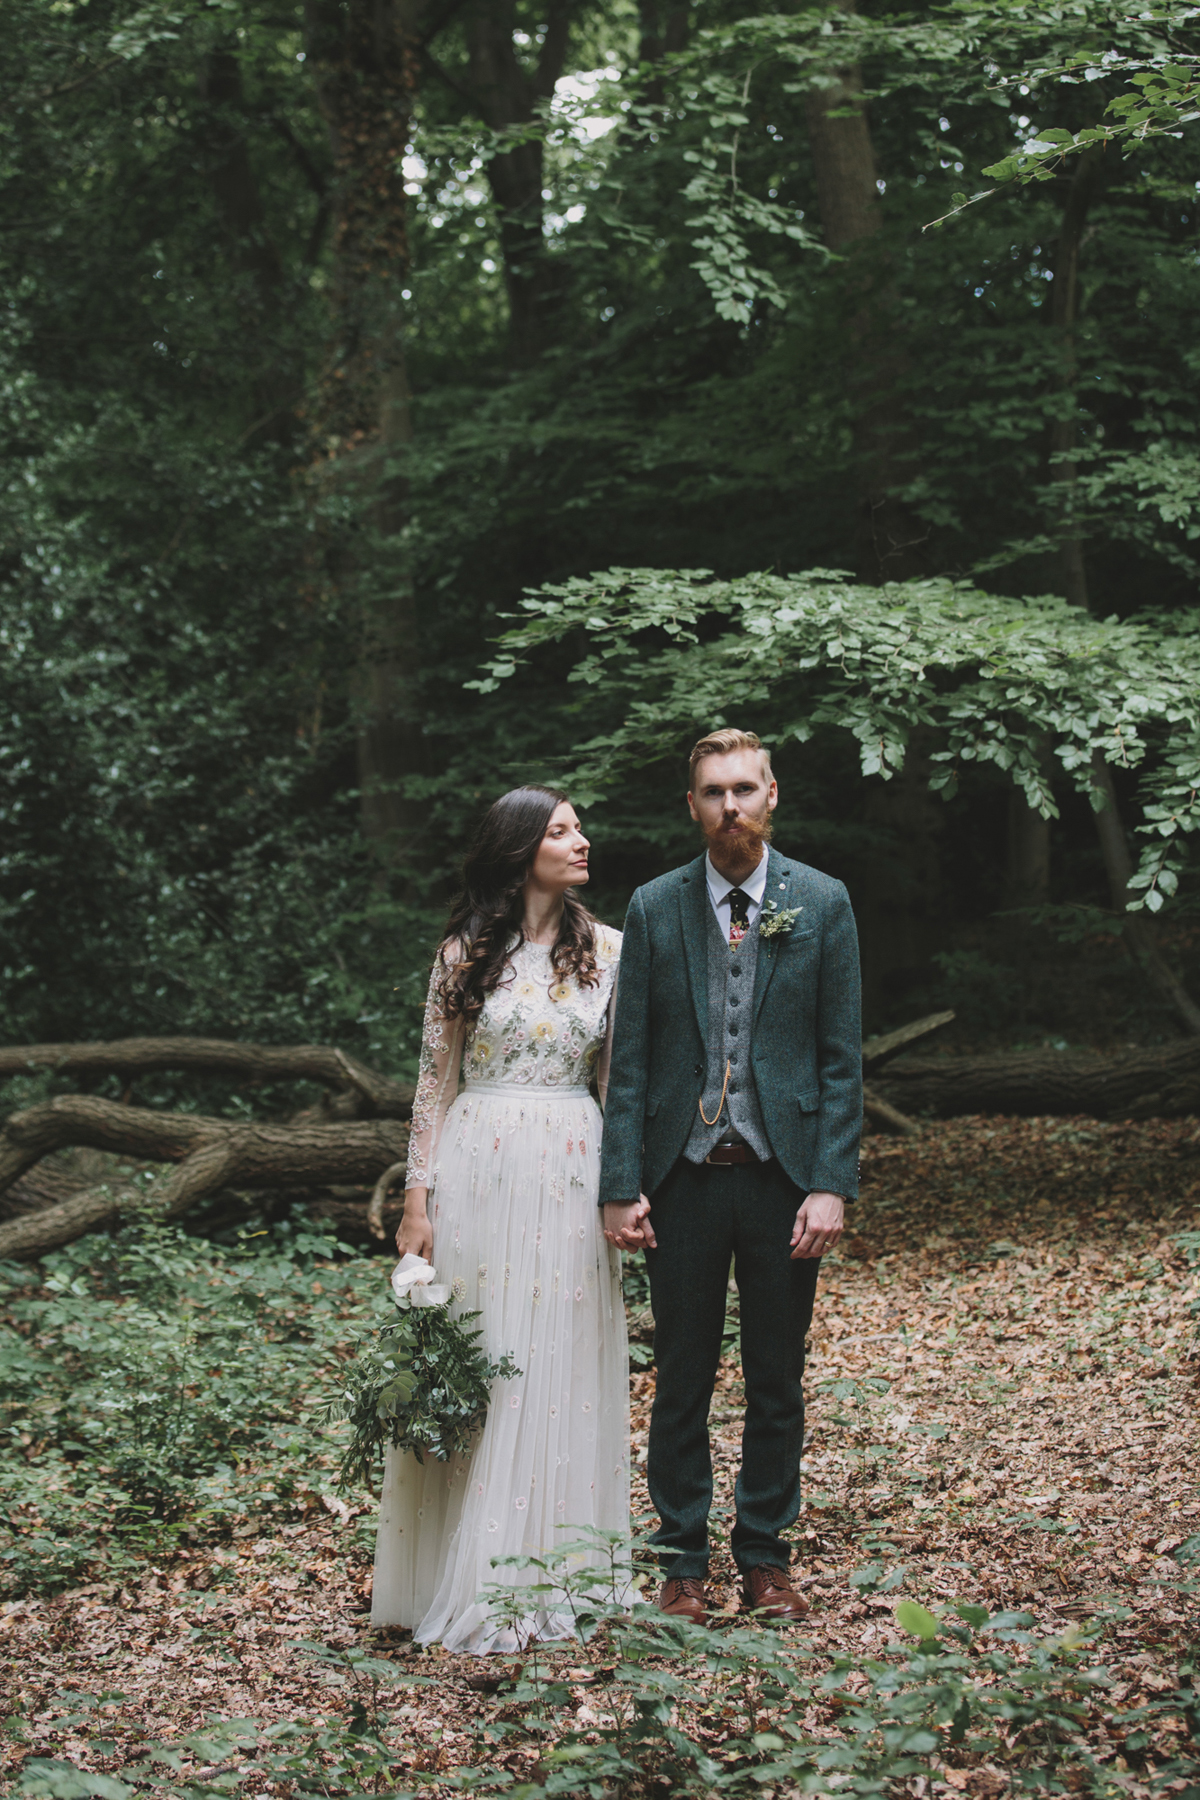 62 Bride in a Needle Thread gown and a Groom with a handlebar moustache and ASOS suit standing in woodland image by McKinley Rodgers